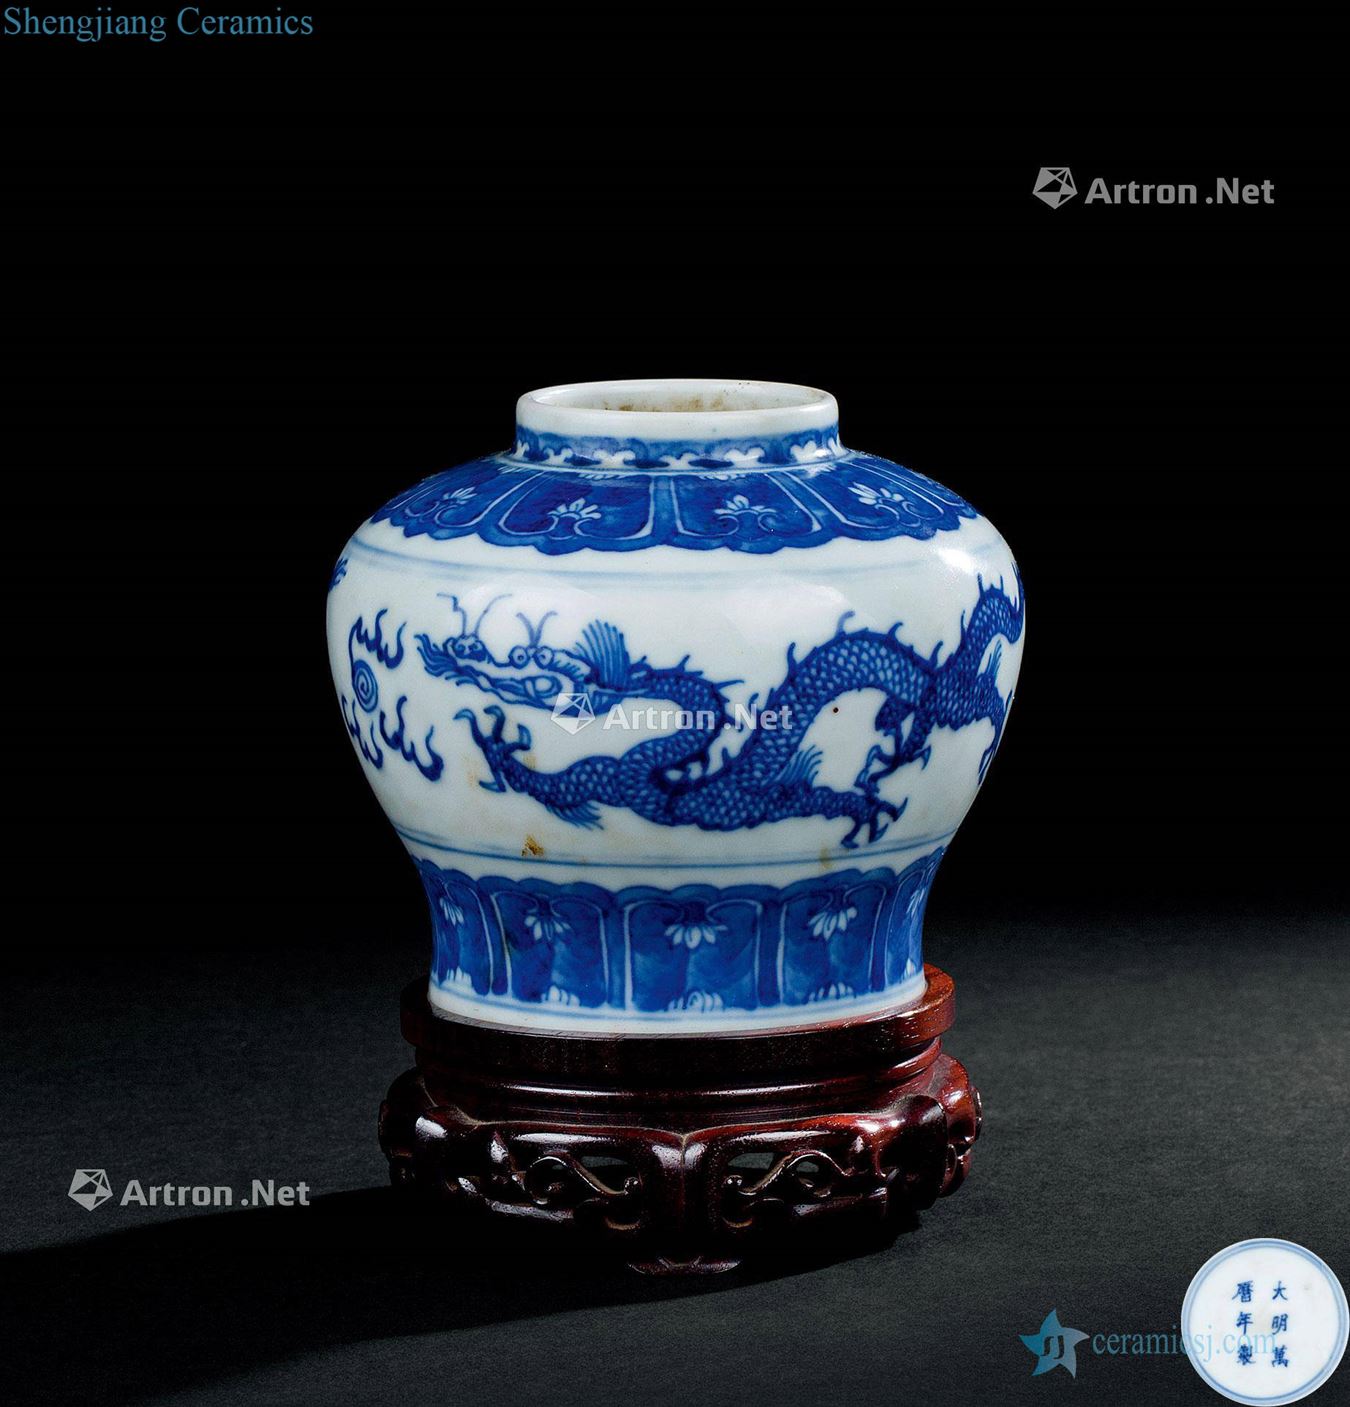 In the qing dynasty (1644-1911) blue and white praised grain tank